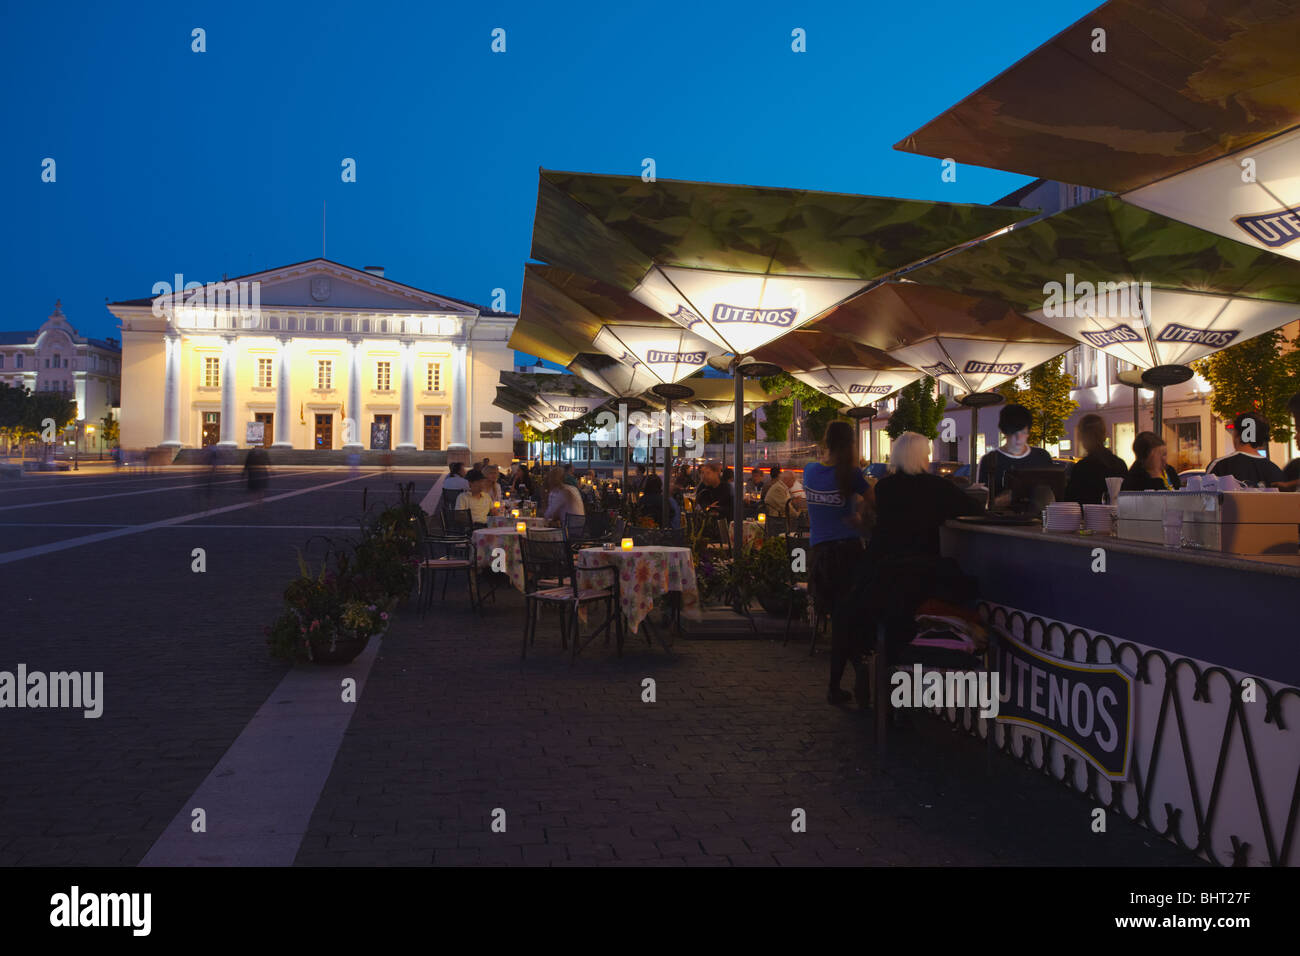 Outdoor Cafe In Rotuses Aikste Square With Town Hall In Background, Vilnius, Lithuania, Baltic States, Eastern Europe Stock Photo